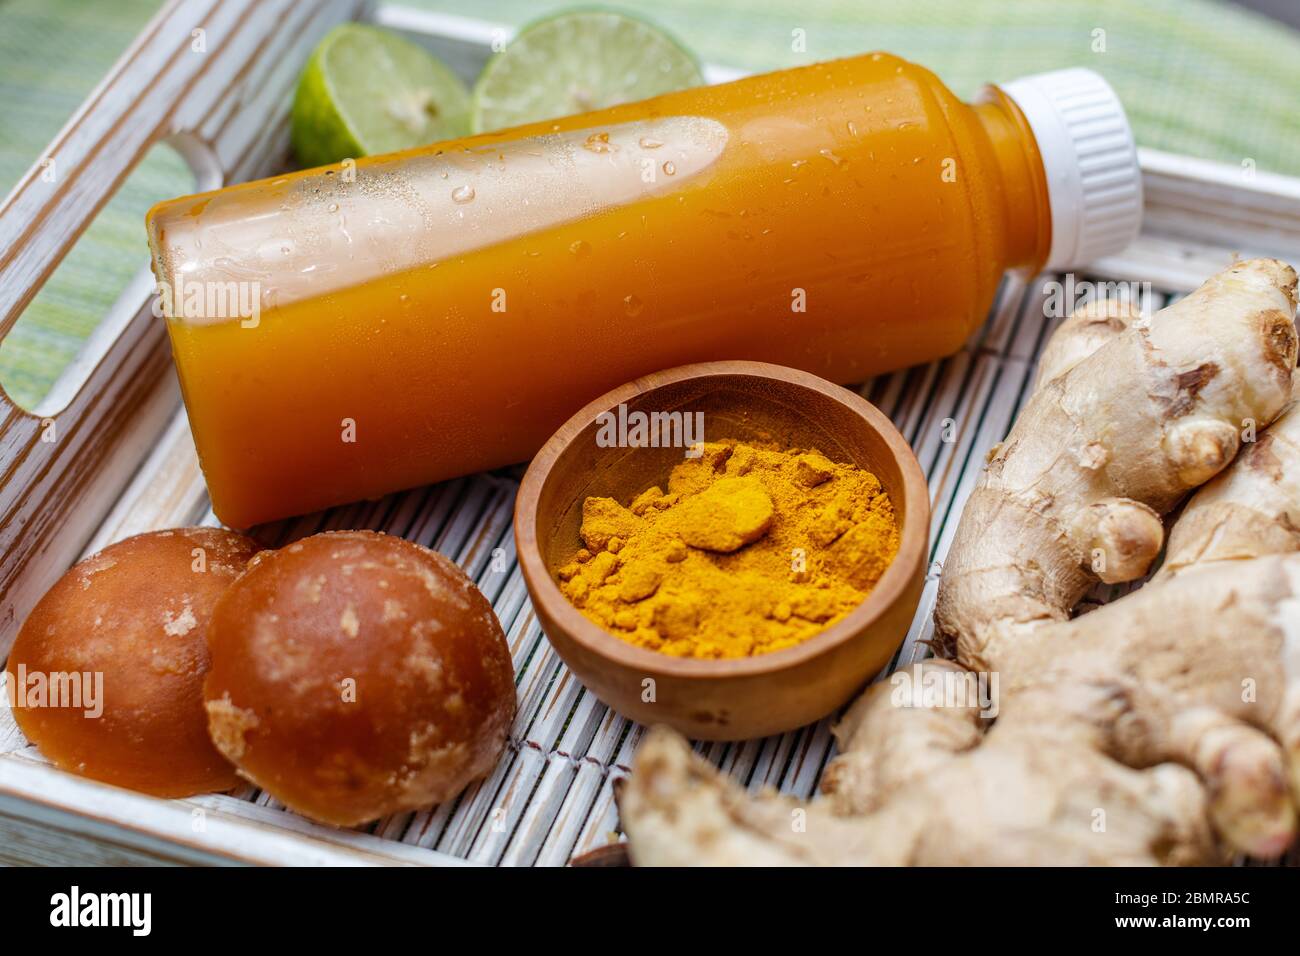 A bottle of Jamu 'Kunir Asam', traditional Indonesian herbal tonic medicine, with ingredients (ginger, turmeric, palm sugar). Bali, Indonesia. Stock Photo